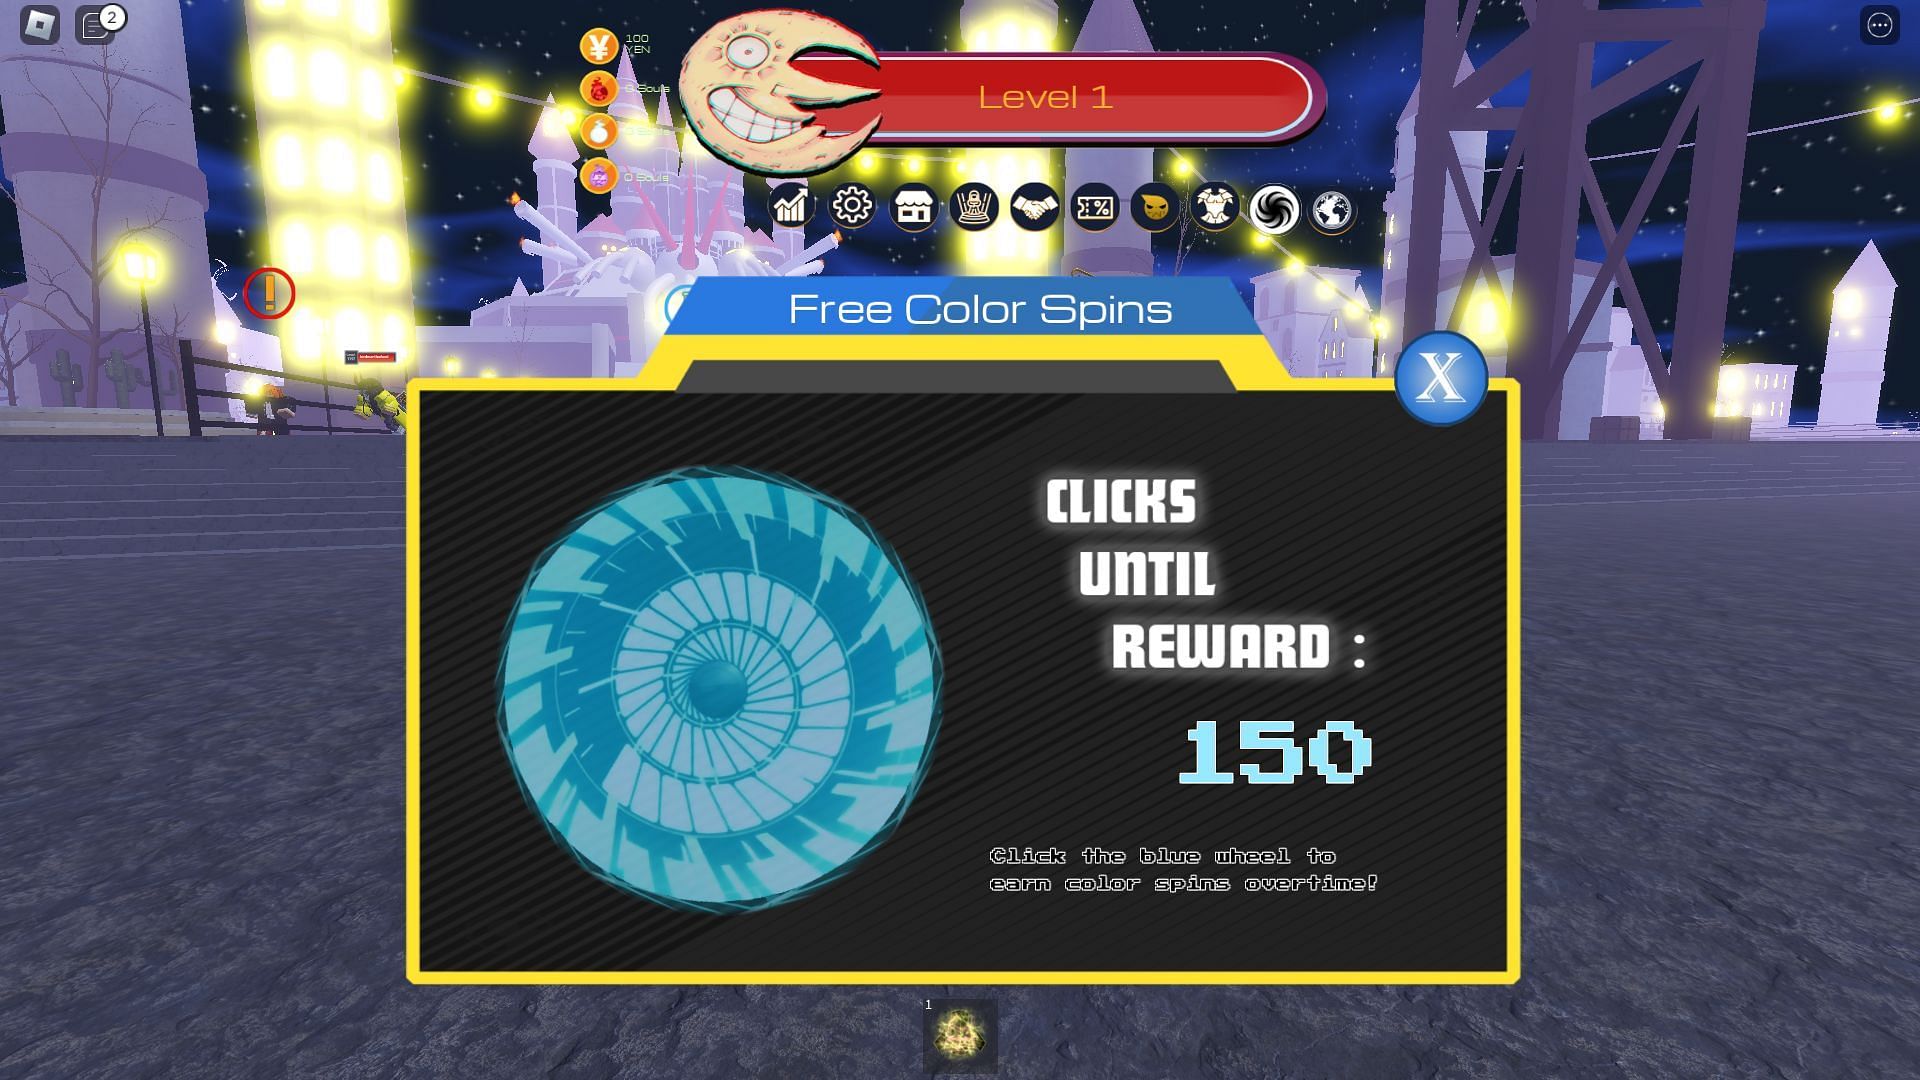 Spins screen in Soul Eater Resonance (Image via Roblox)